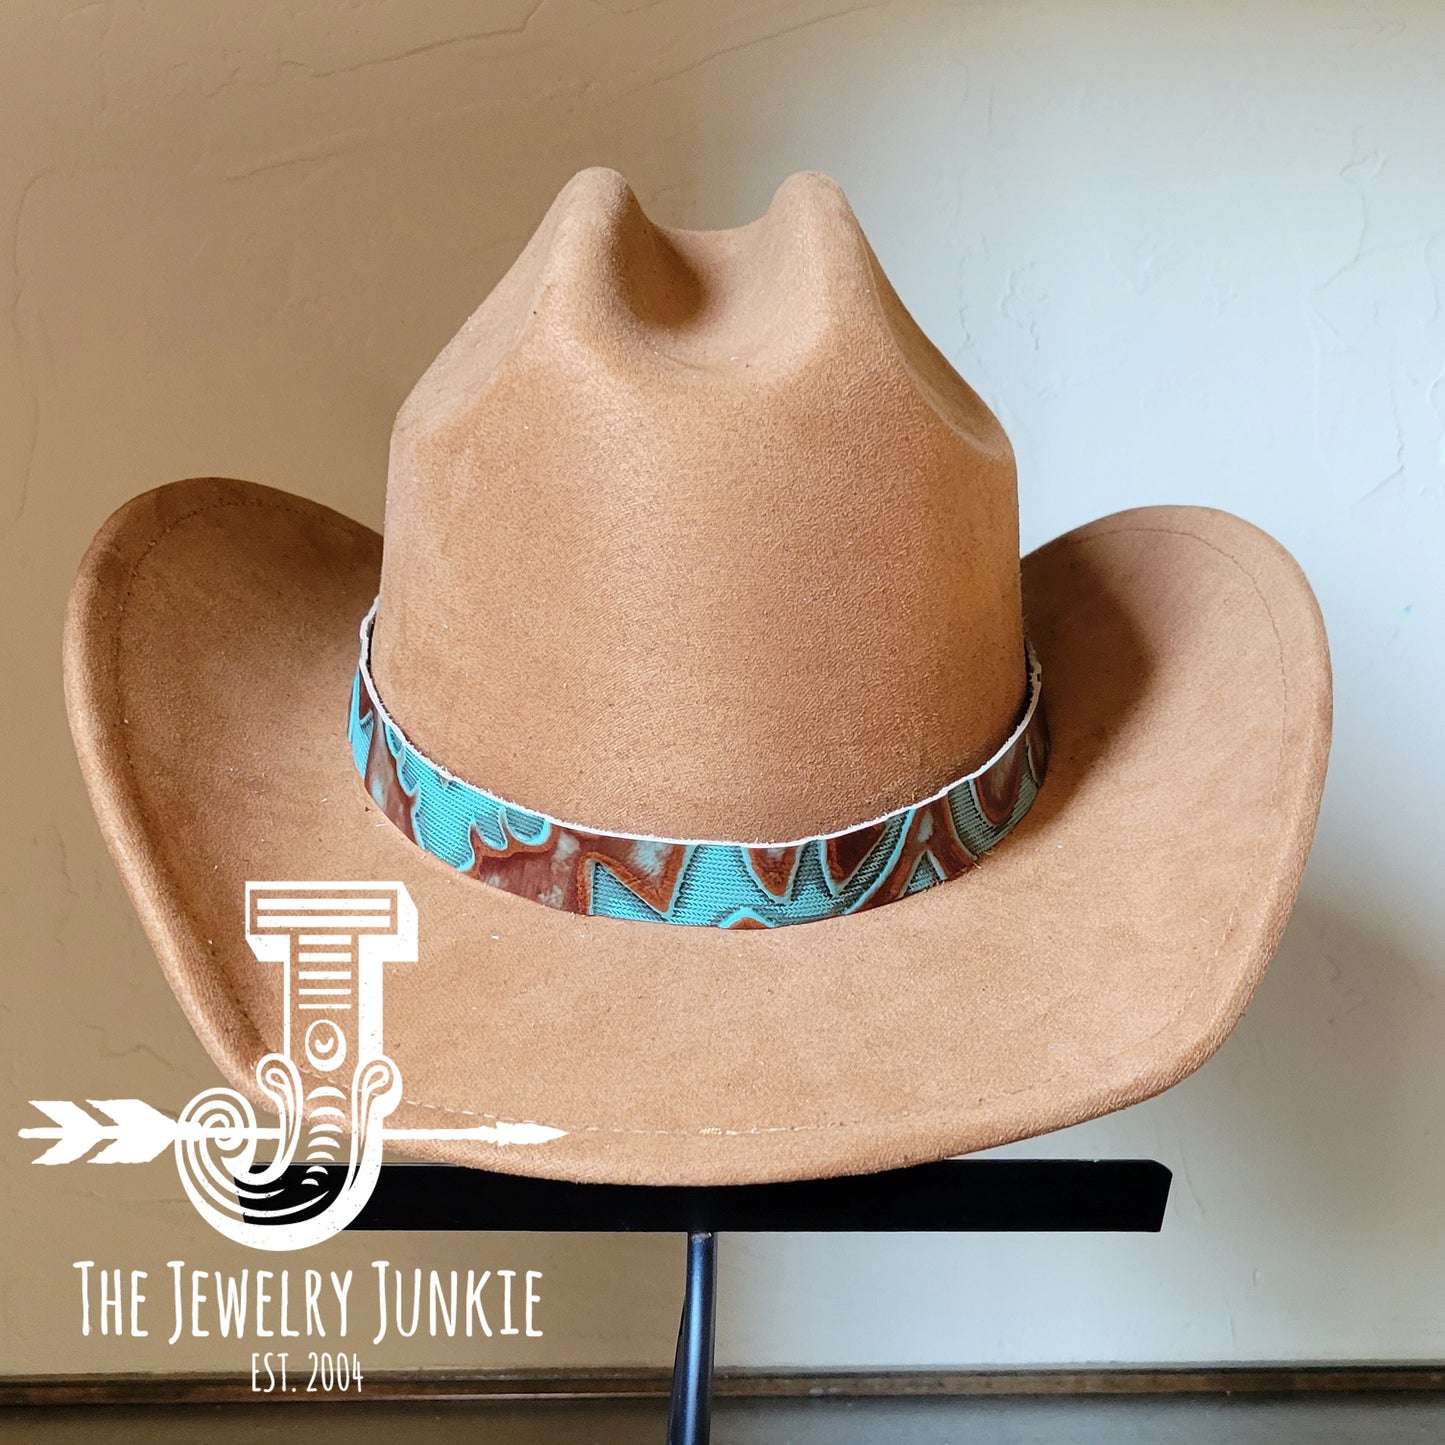 Cowboy/Cowgirl Beaded HAT BAND - Western Hat Bands, Hat Bands from Texas,  Made in the U.S.A.! : Western Hat Bands